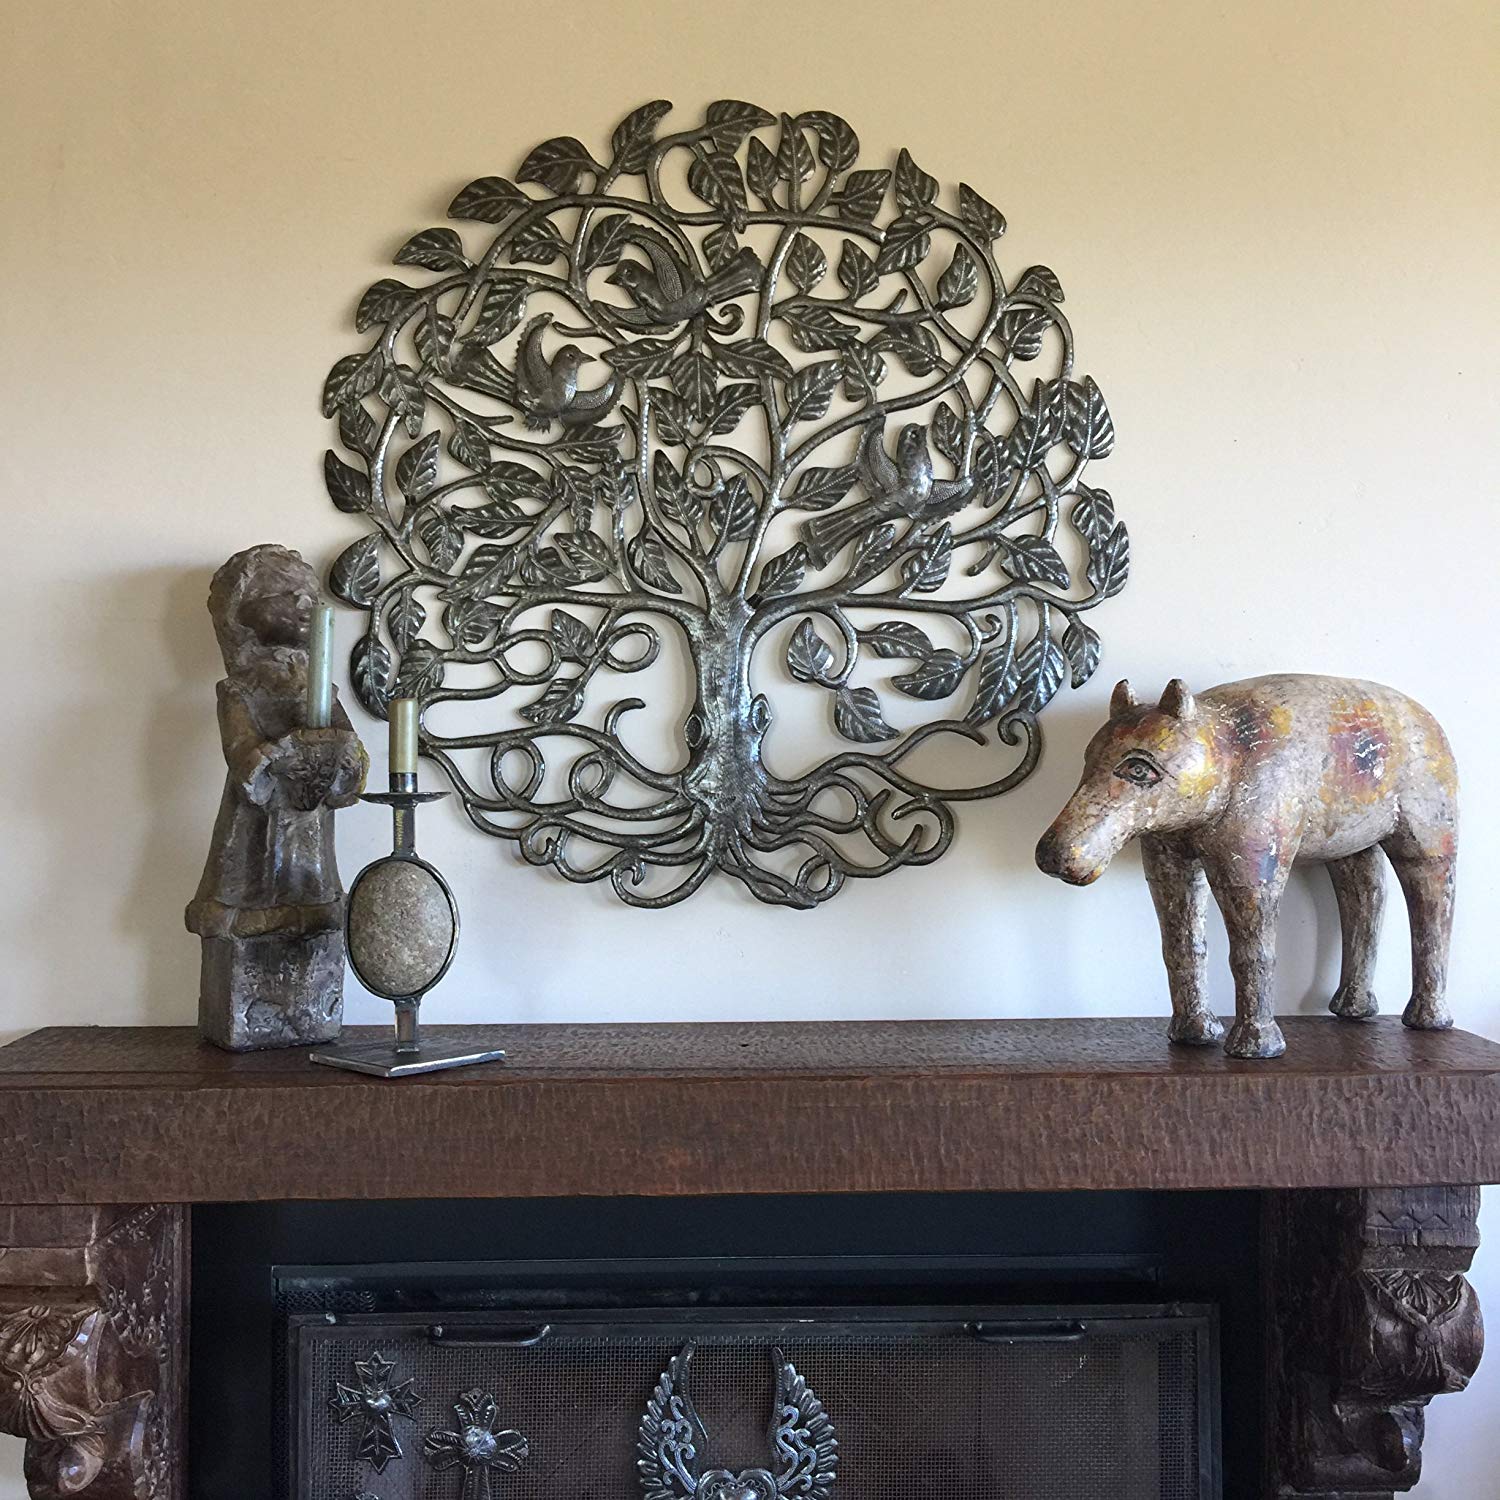 Large Metal Tree of Life, Wall Hanging Sculpture from Haiti, No Machines Used, Handmade, Home Decor 32" Round